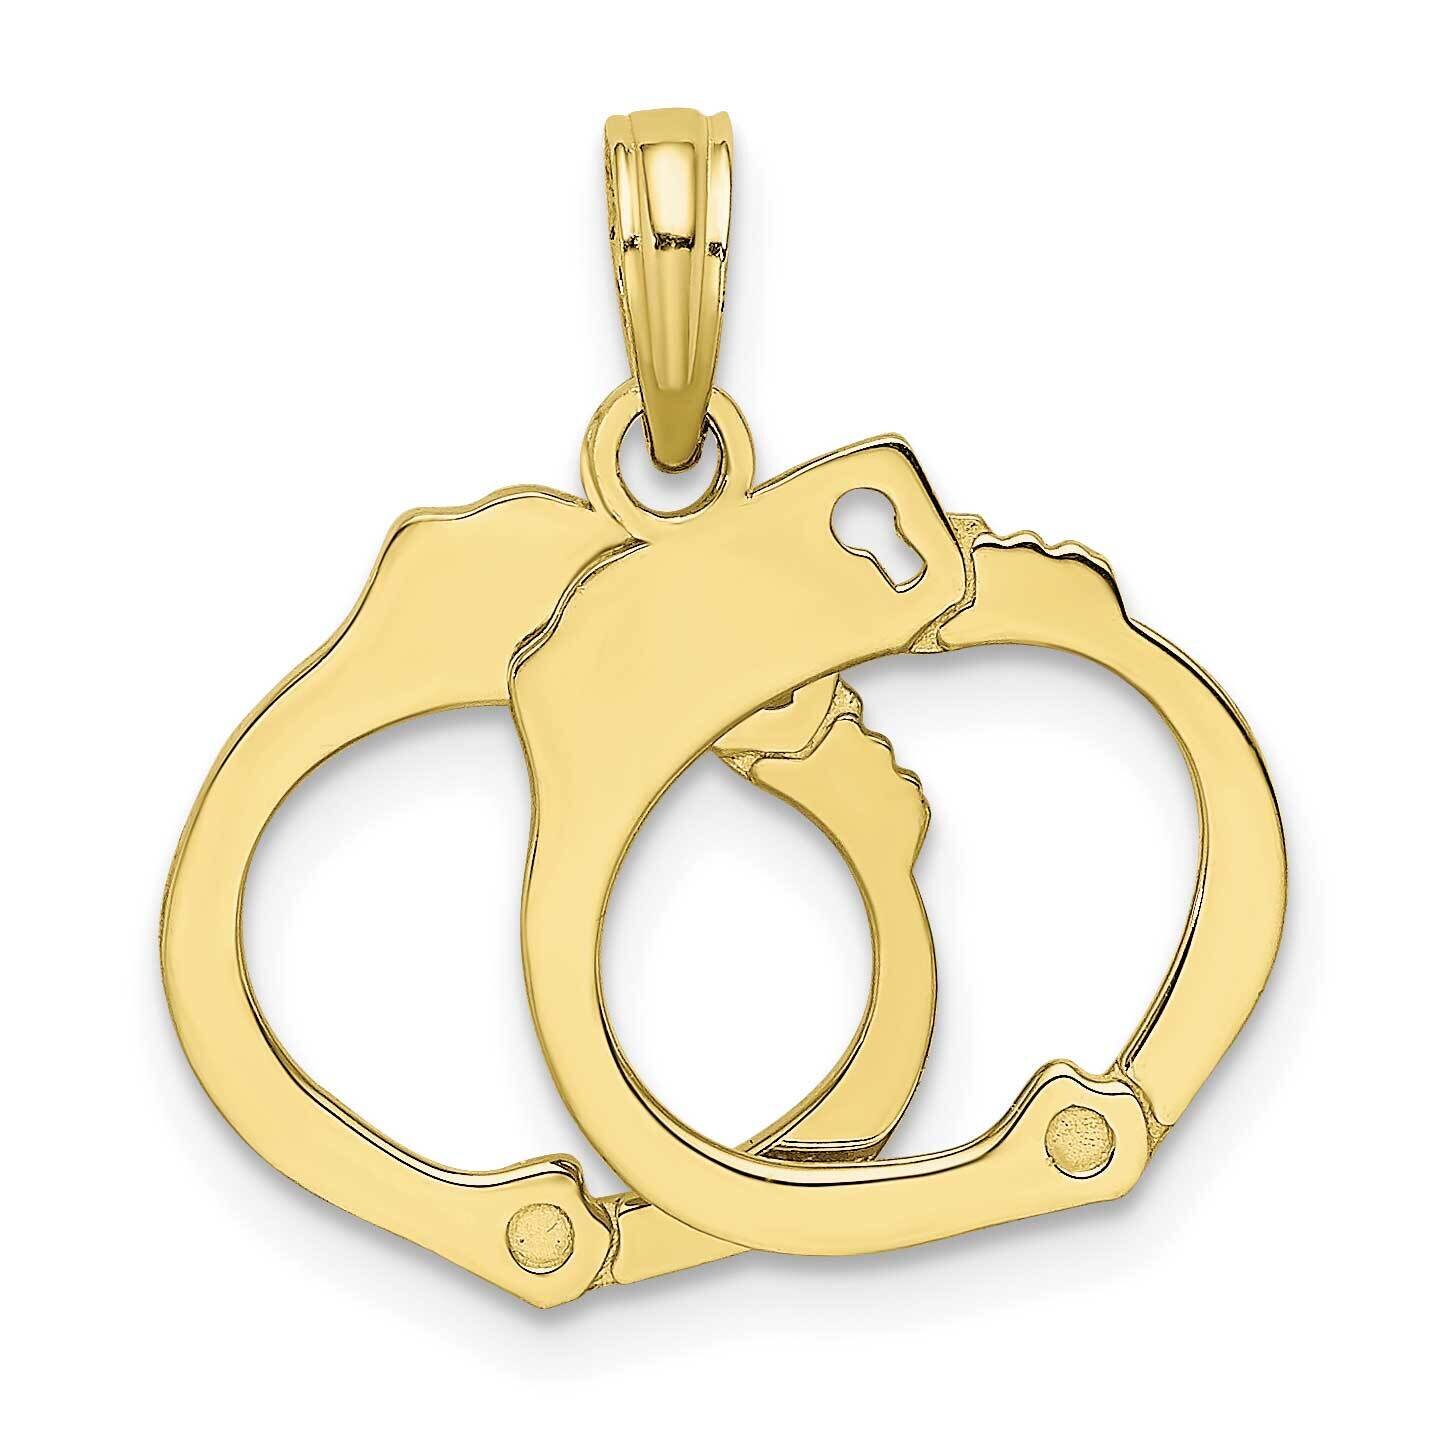 Moveable Handcuffs Charm 10k Gold 10K7253